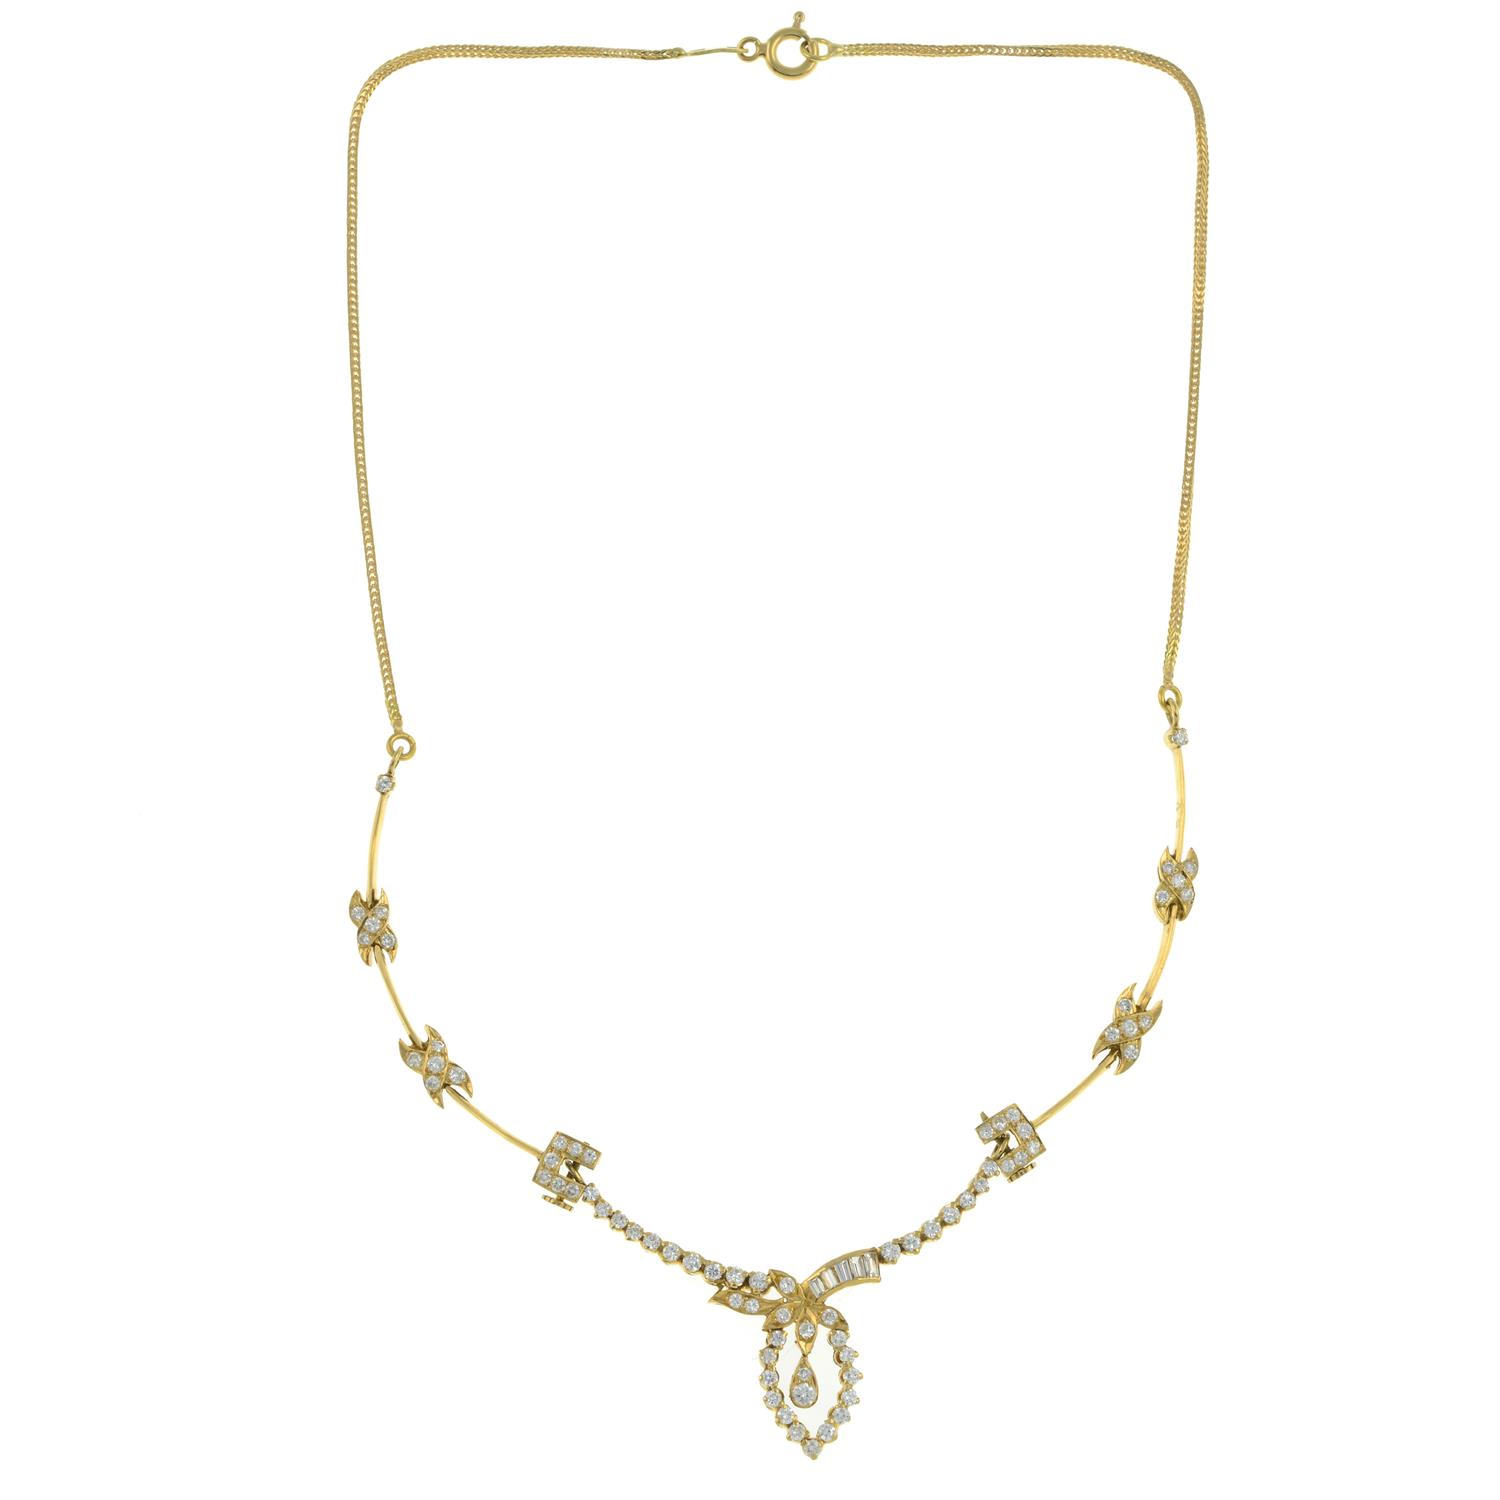 18ct gold diamond necklace - Image 2 of 3